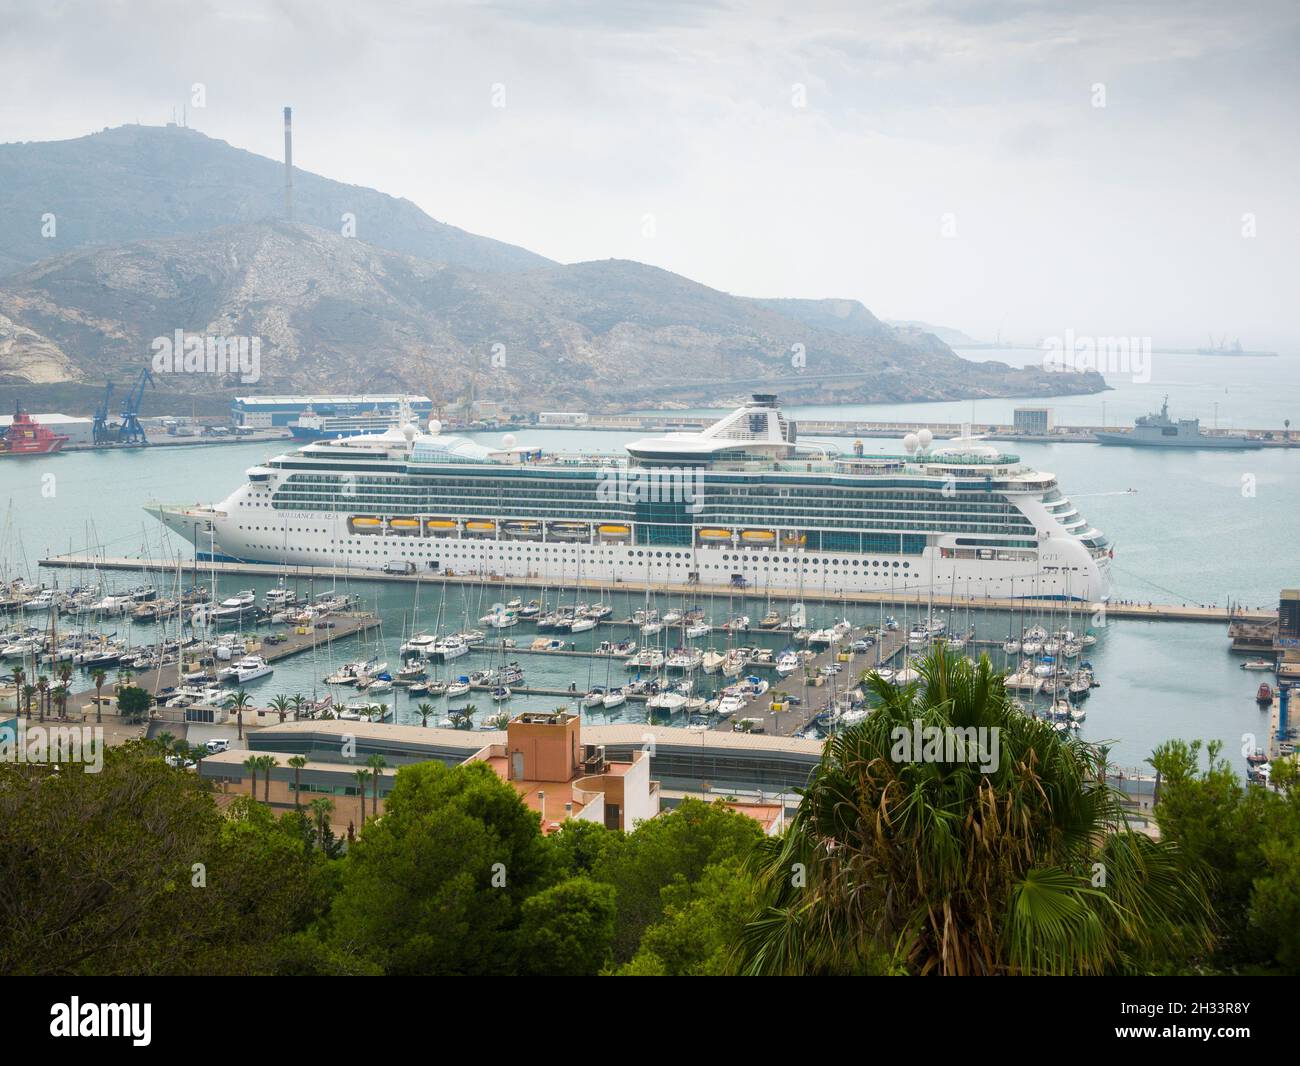 The Royal Caribbean cruise ship, Brilliance of the Seas, docked in the port in the Costa Blanca city of Cartagena, Spain. Stock Photo